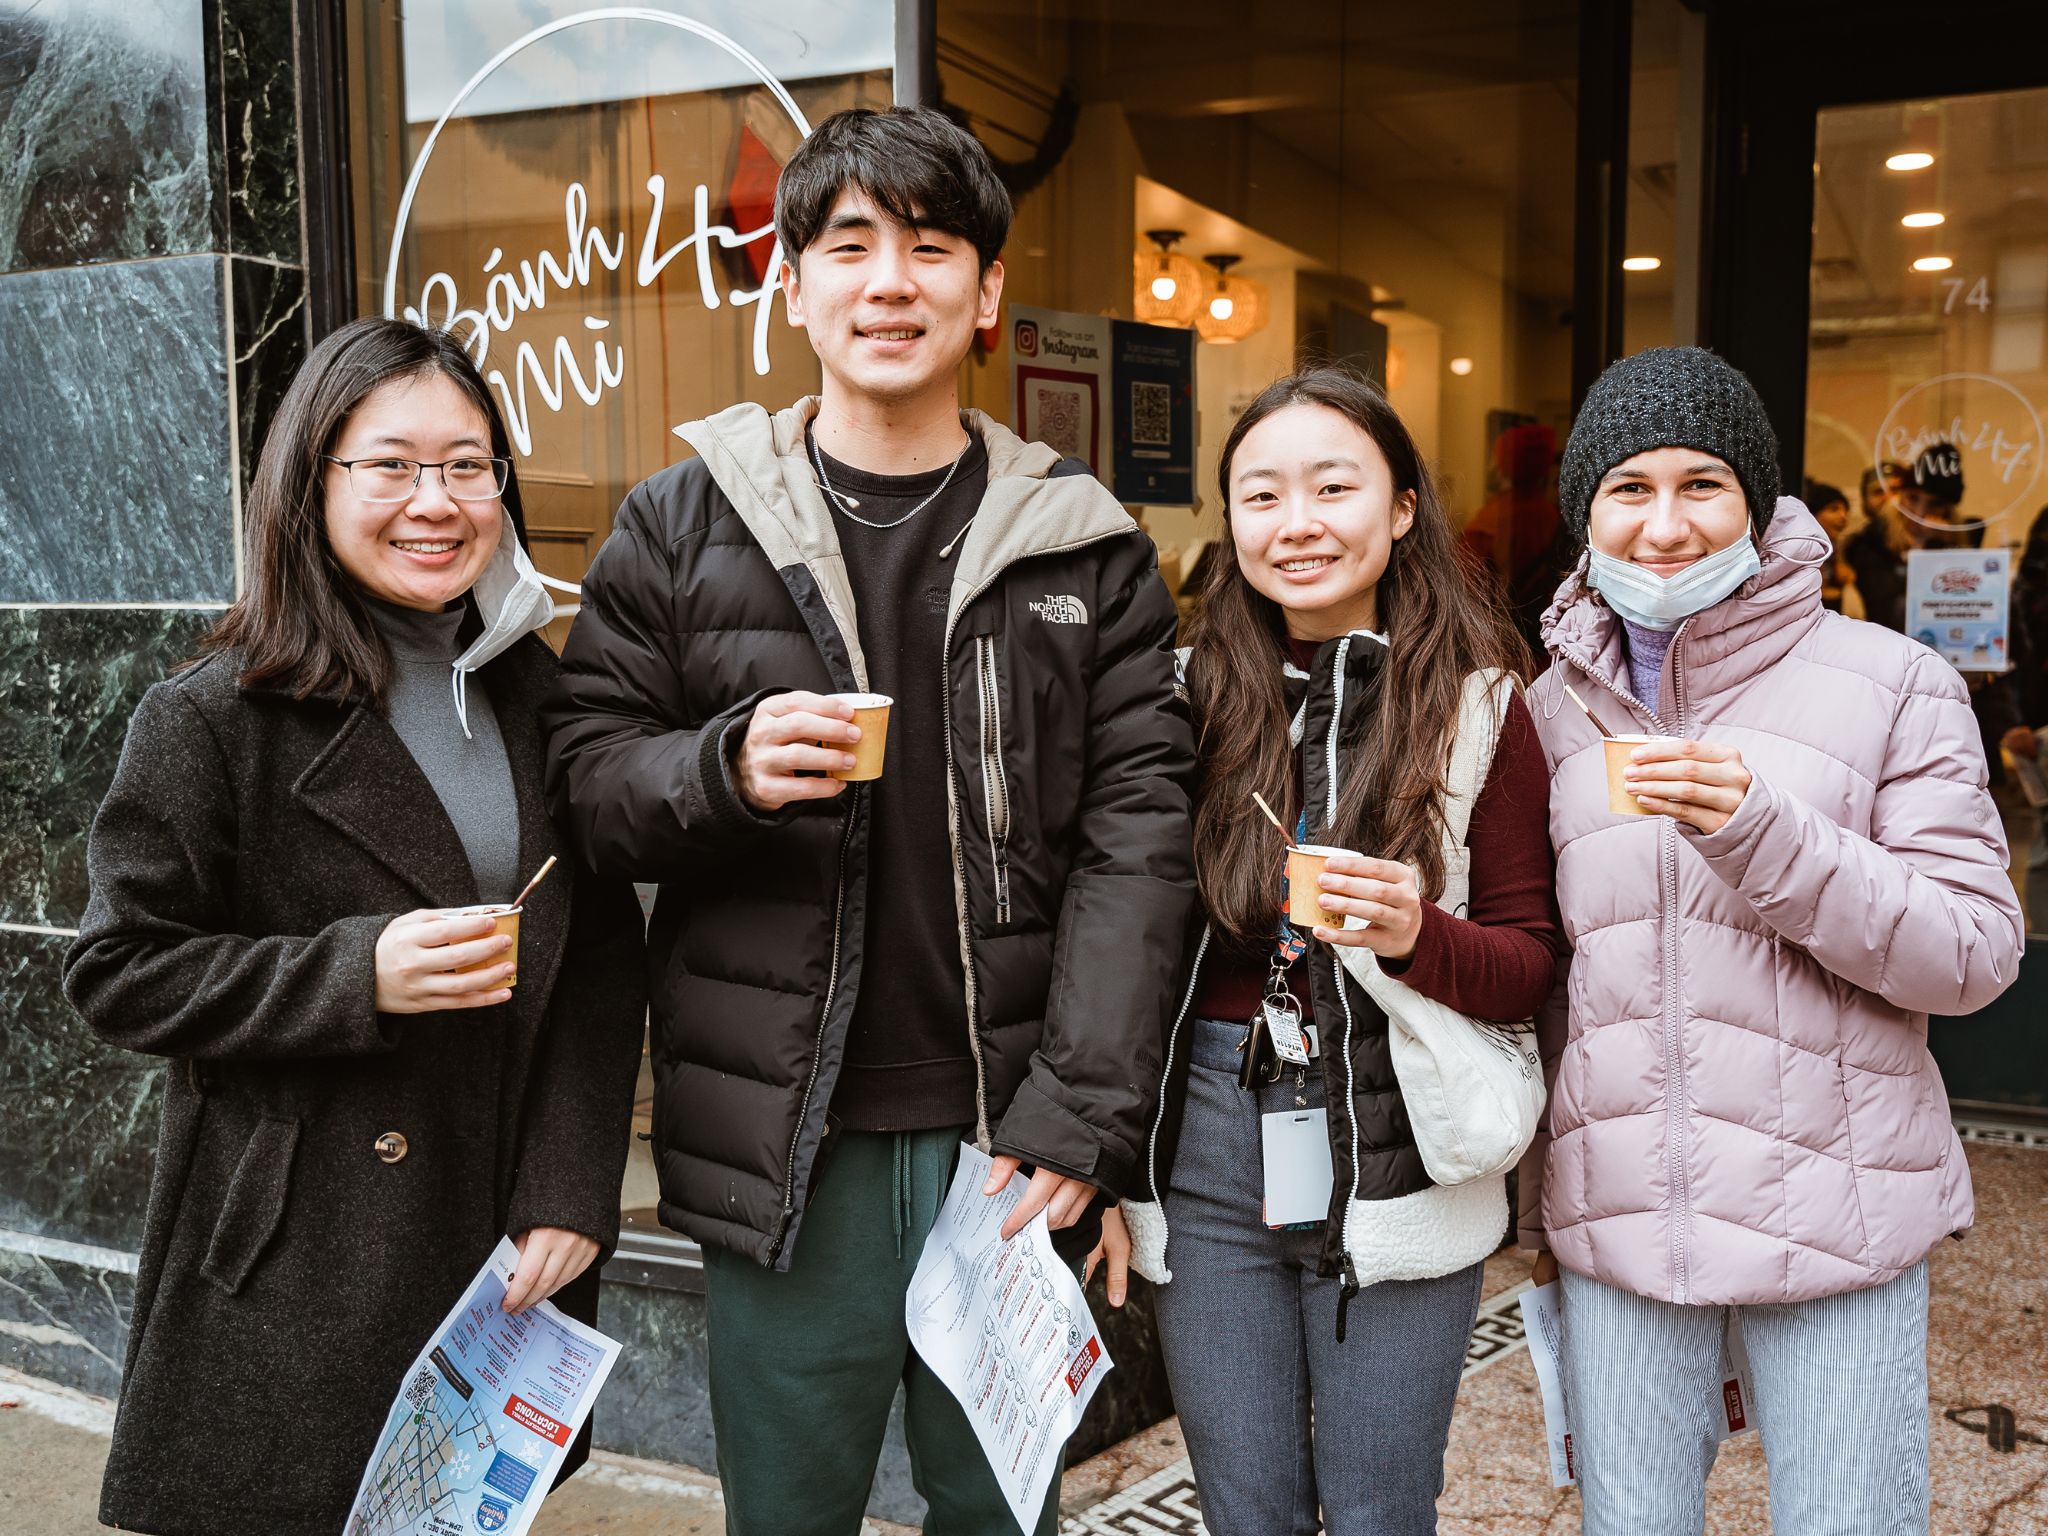 Four people stand in line holding cups of hot chocolate